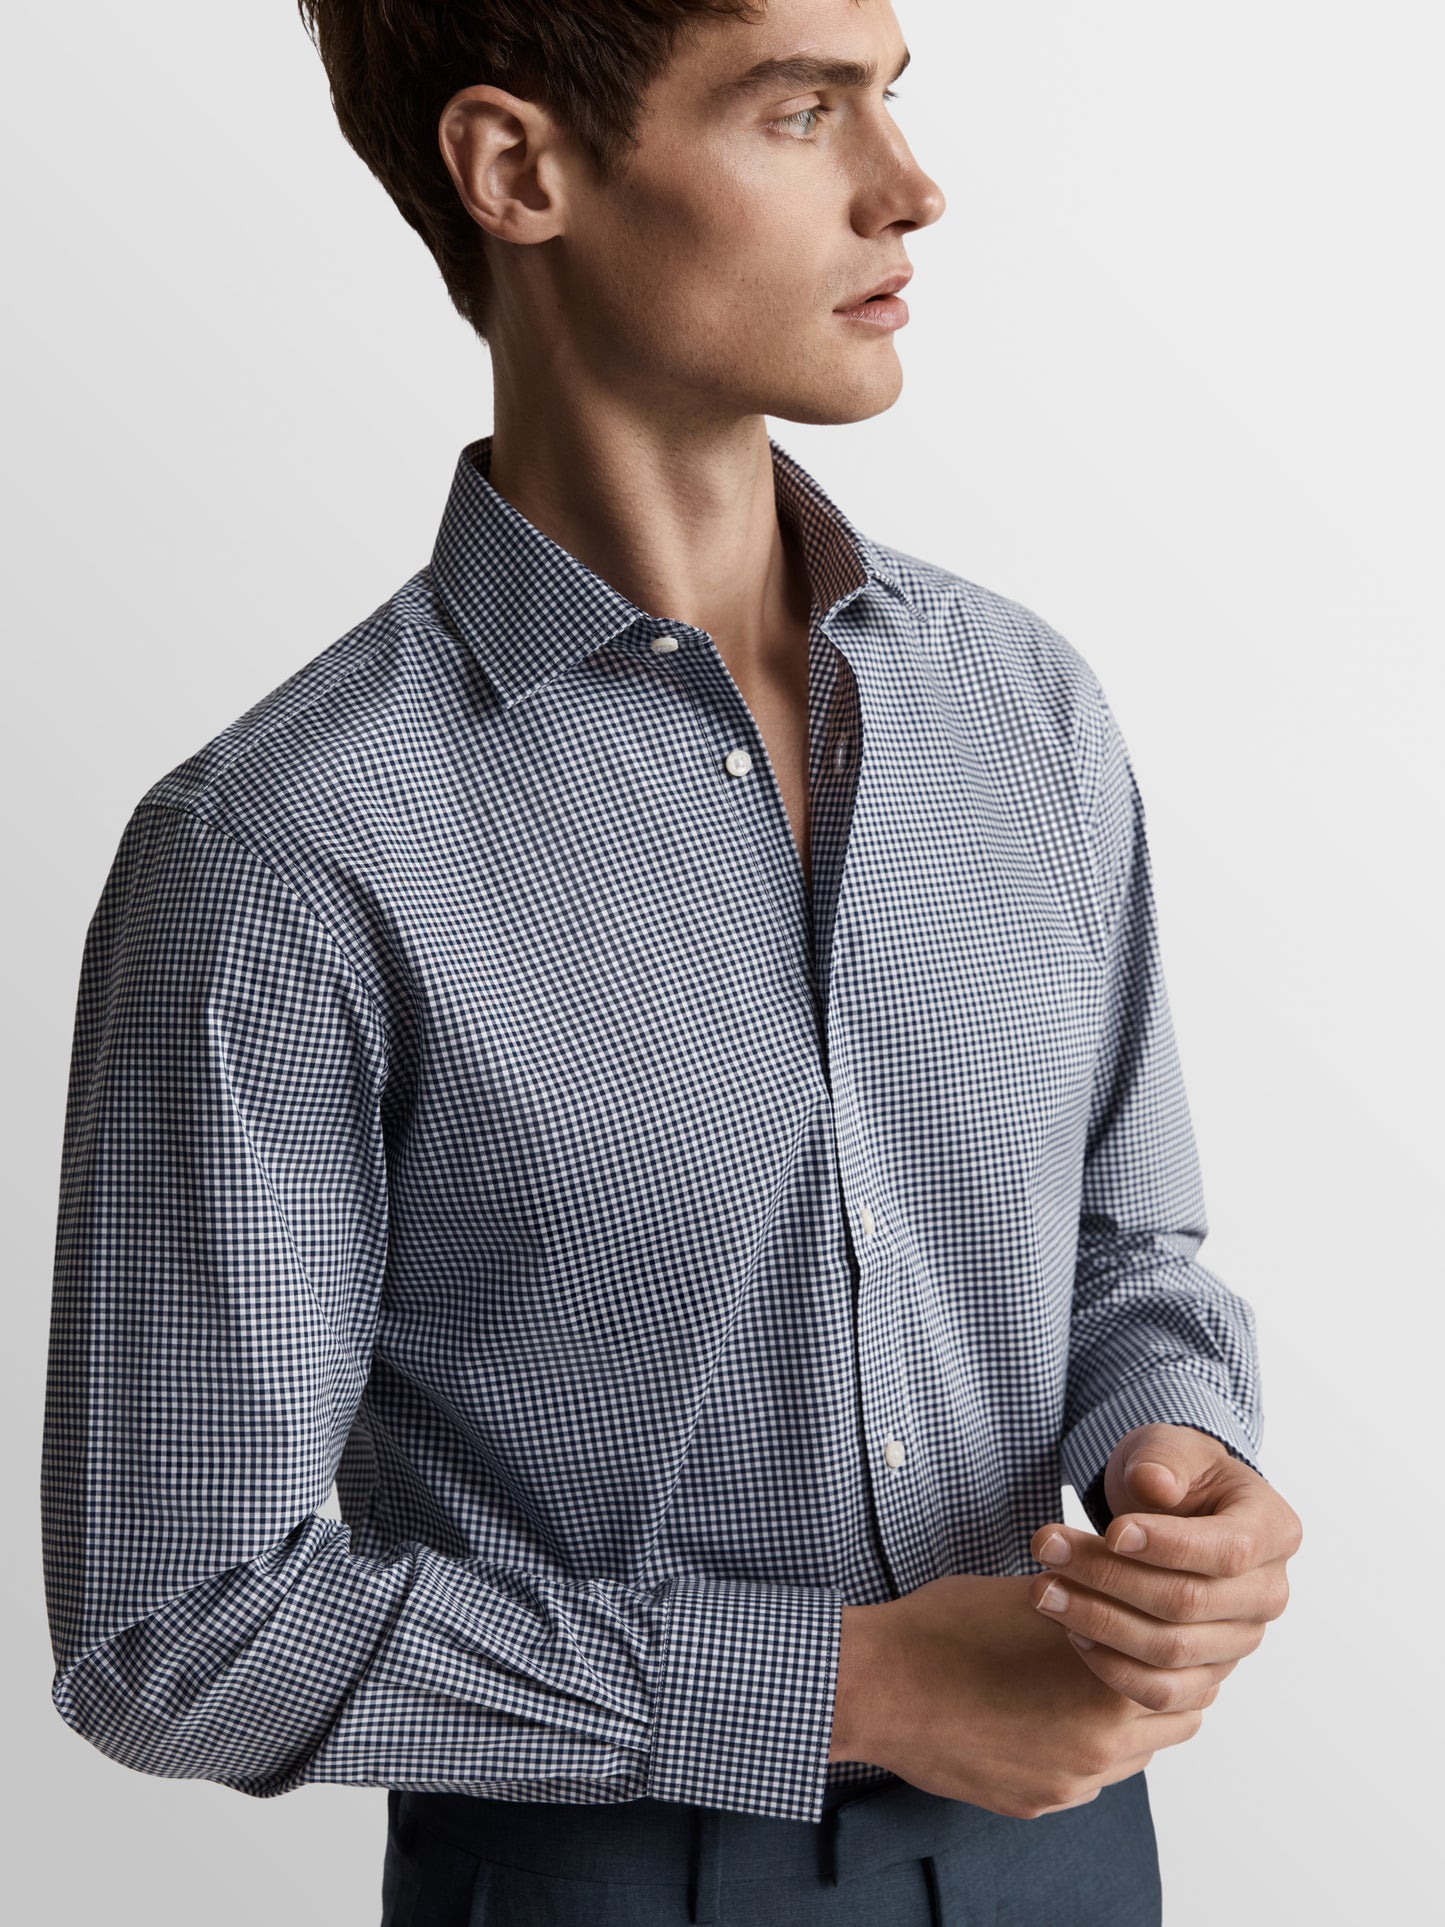 Image 2 of Max Performance Navy Blue Small Gingham Plain Weave Slim Fit Single Cuff Classic Collar Shirt